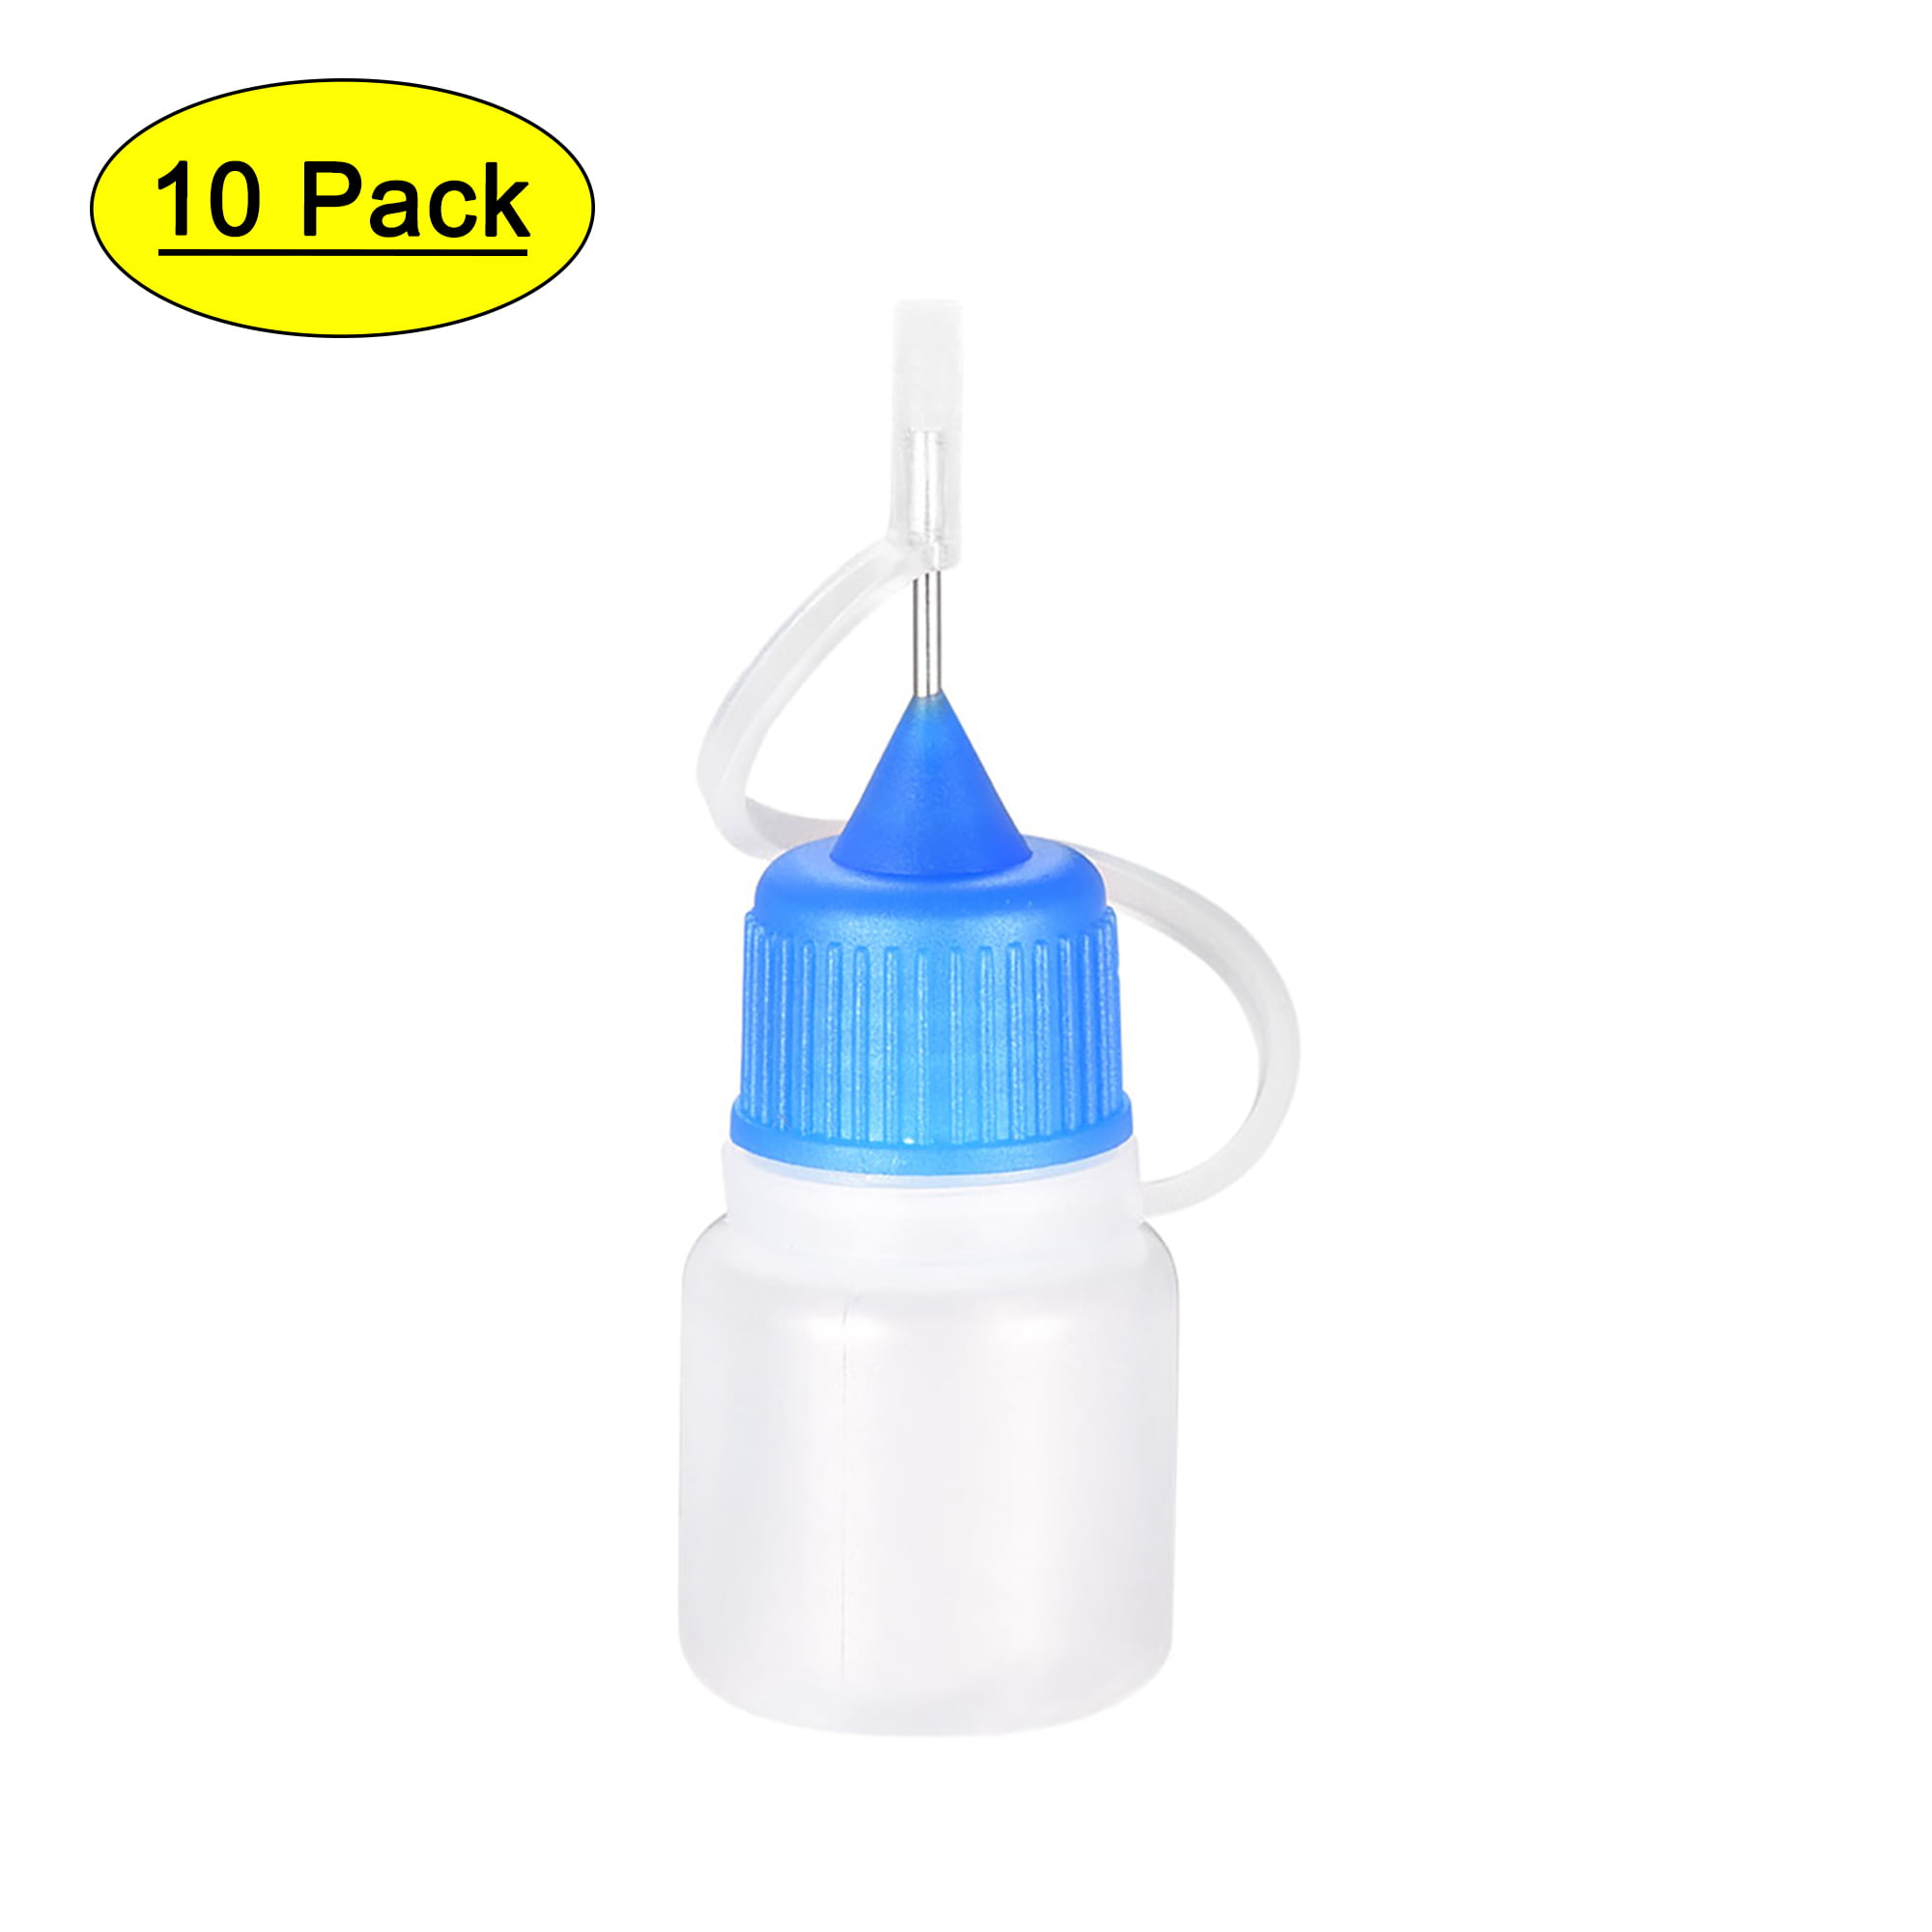 Uxcell Needle Tip Bottle Precision Plastic Applicator with White Cap for  DIY, Cleaning, Repair, Liquids, 3ml